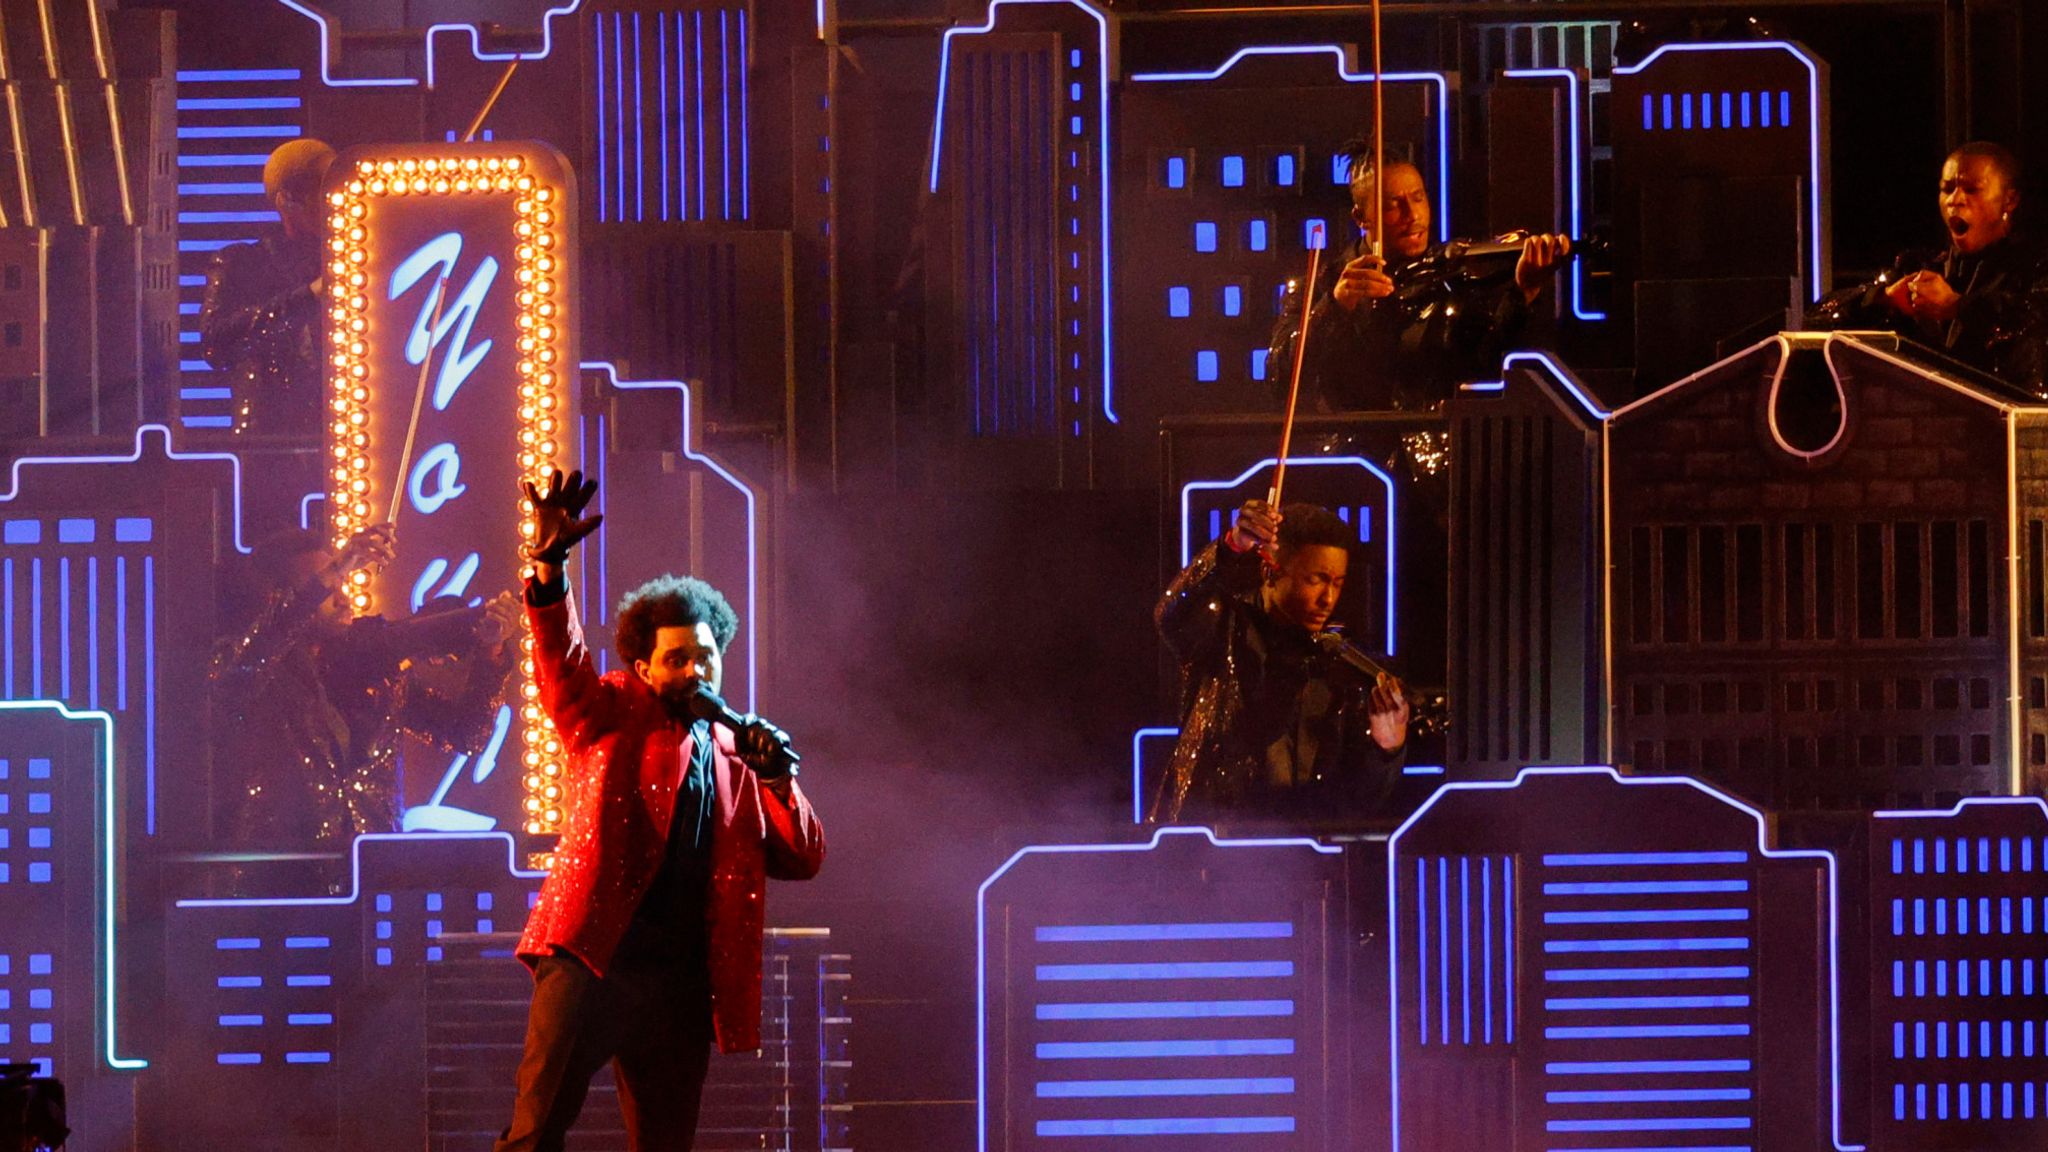 The Weeknd lights up Super Bowl Halftime Show with a smashing performance